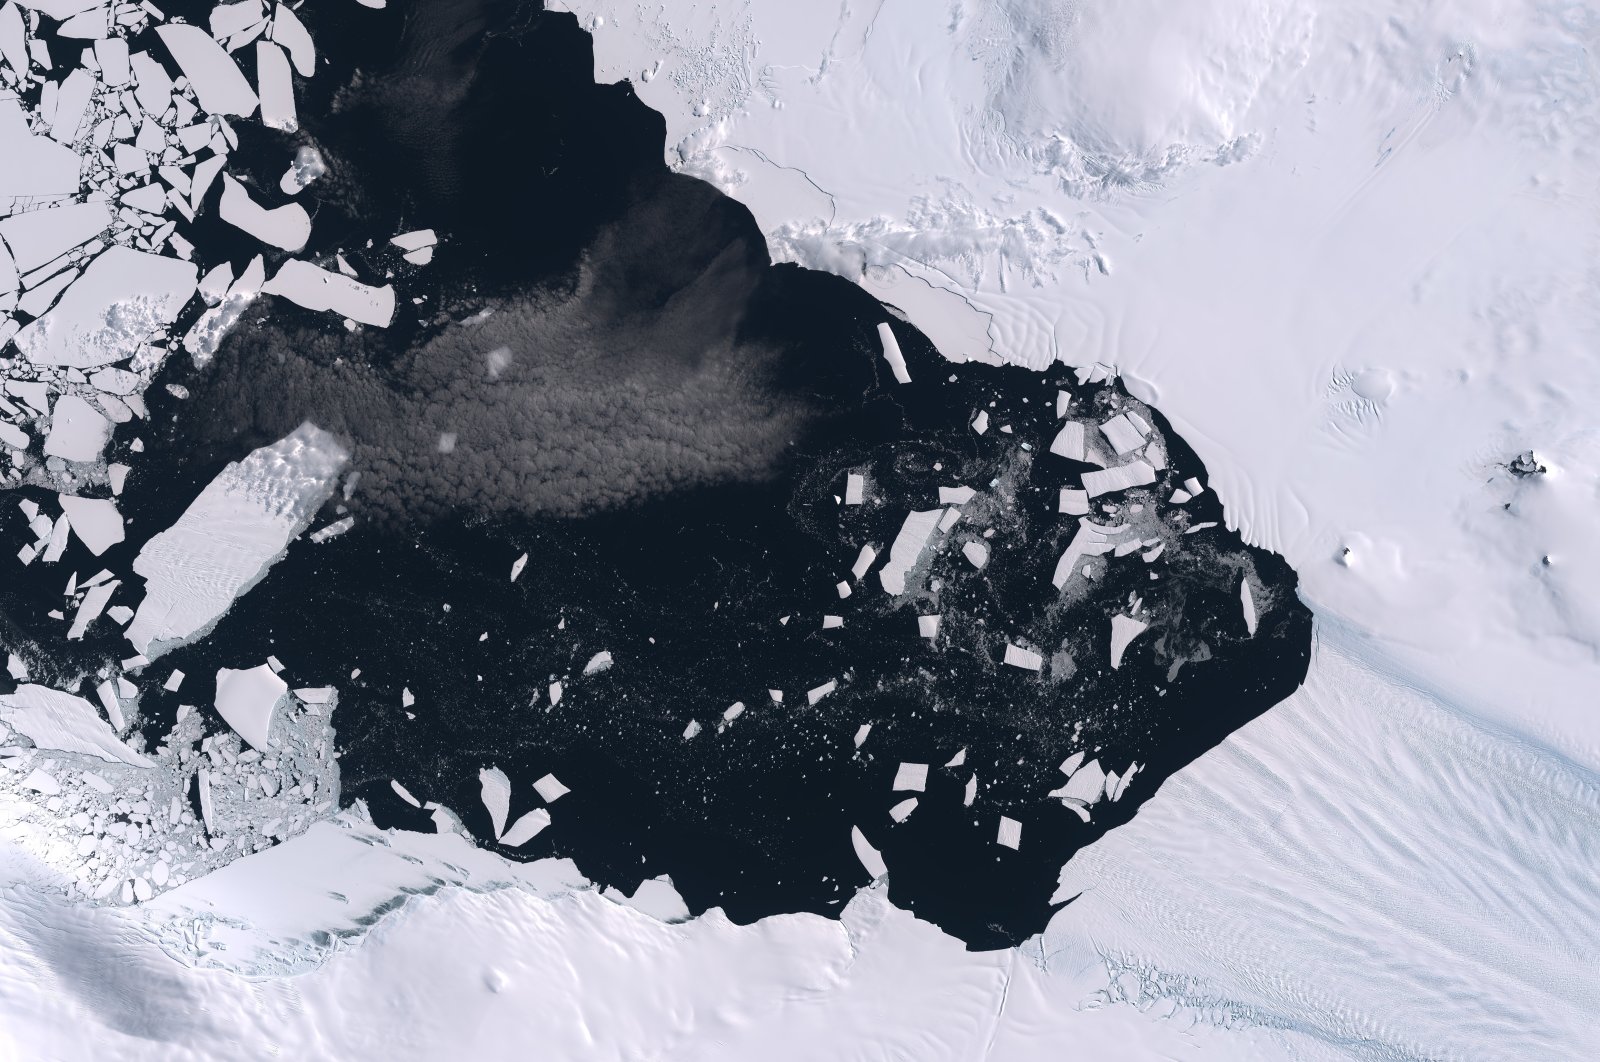 Satellite image shows breakup of ice pack at the mouth of the Pine Island Glacier, in Antarctica, Jan. 31, 2019. (Getty Images Photo)